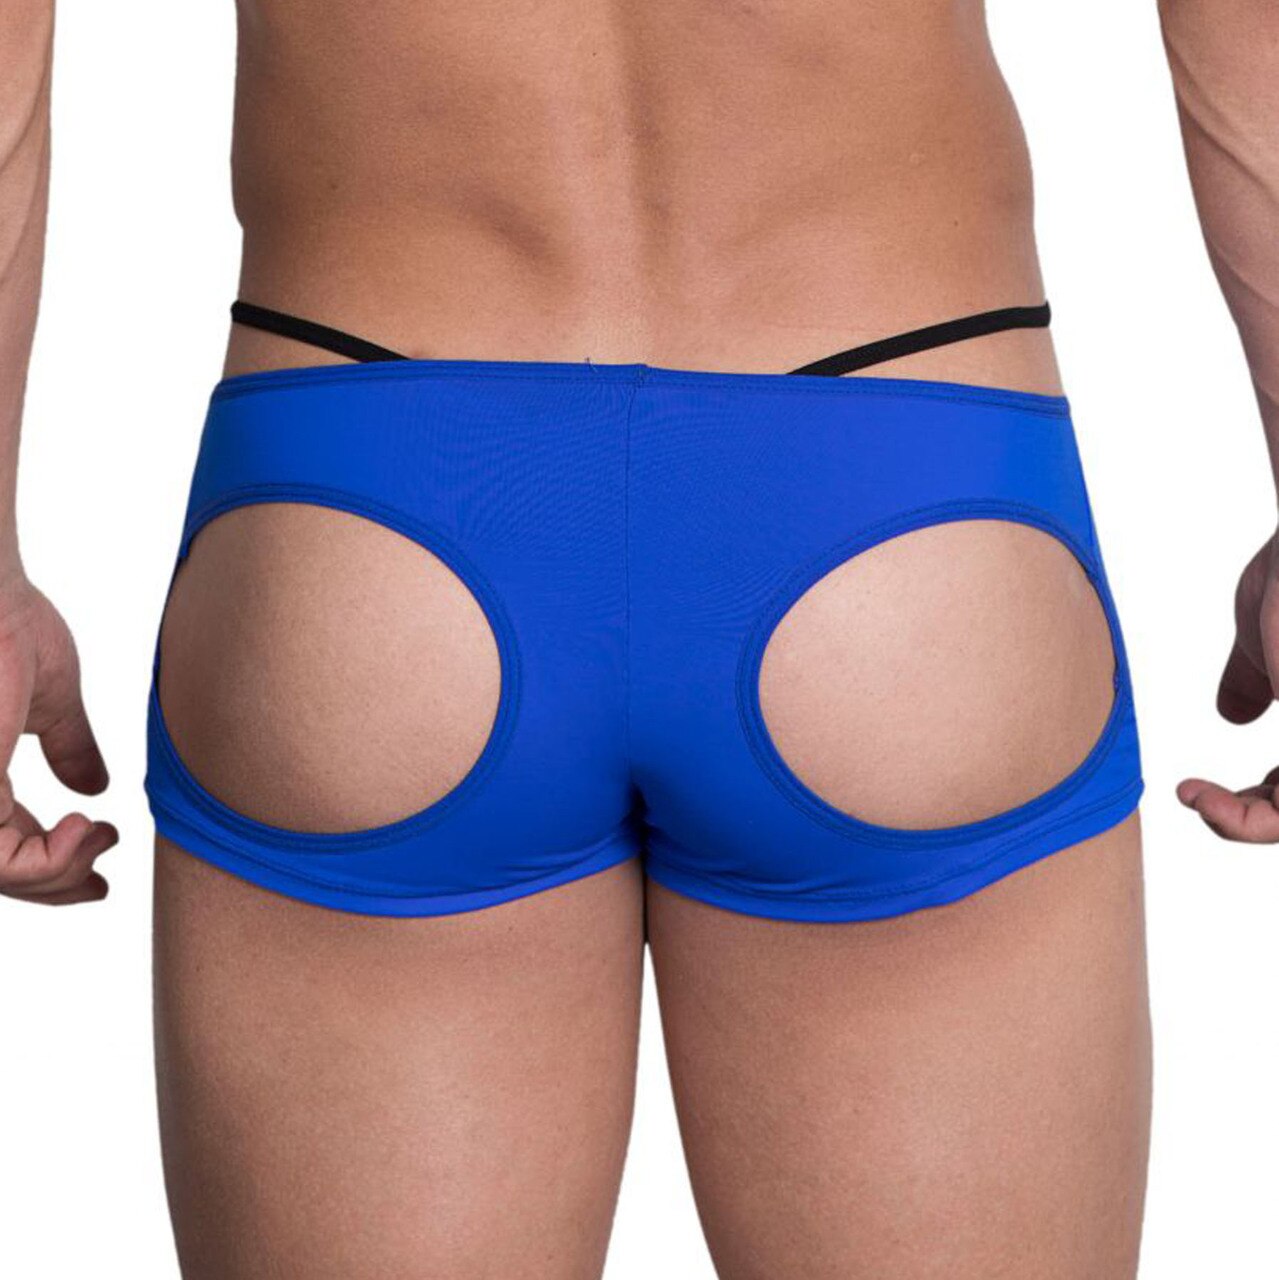 SALE - Mens Hidden Seduction Open Front & Back Hot Pants with G string Black and Blue